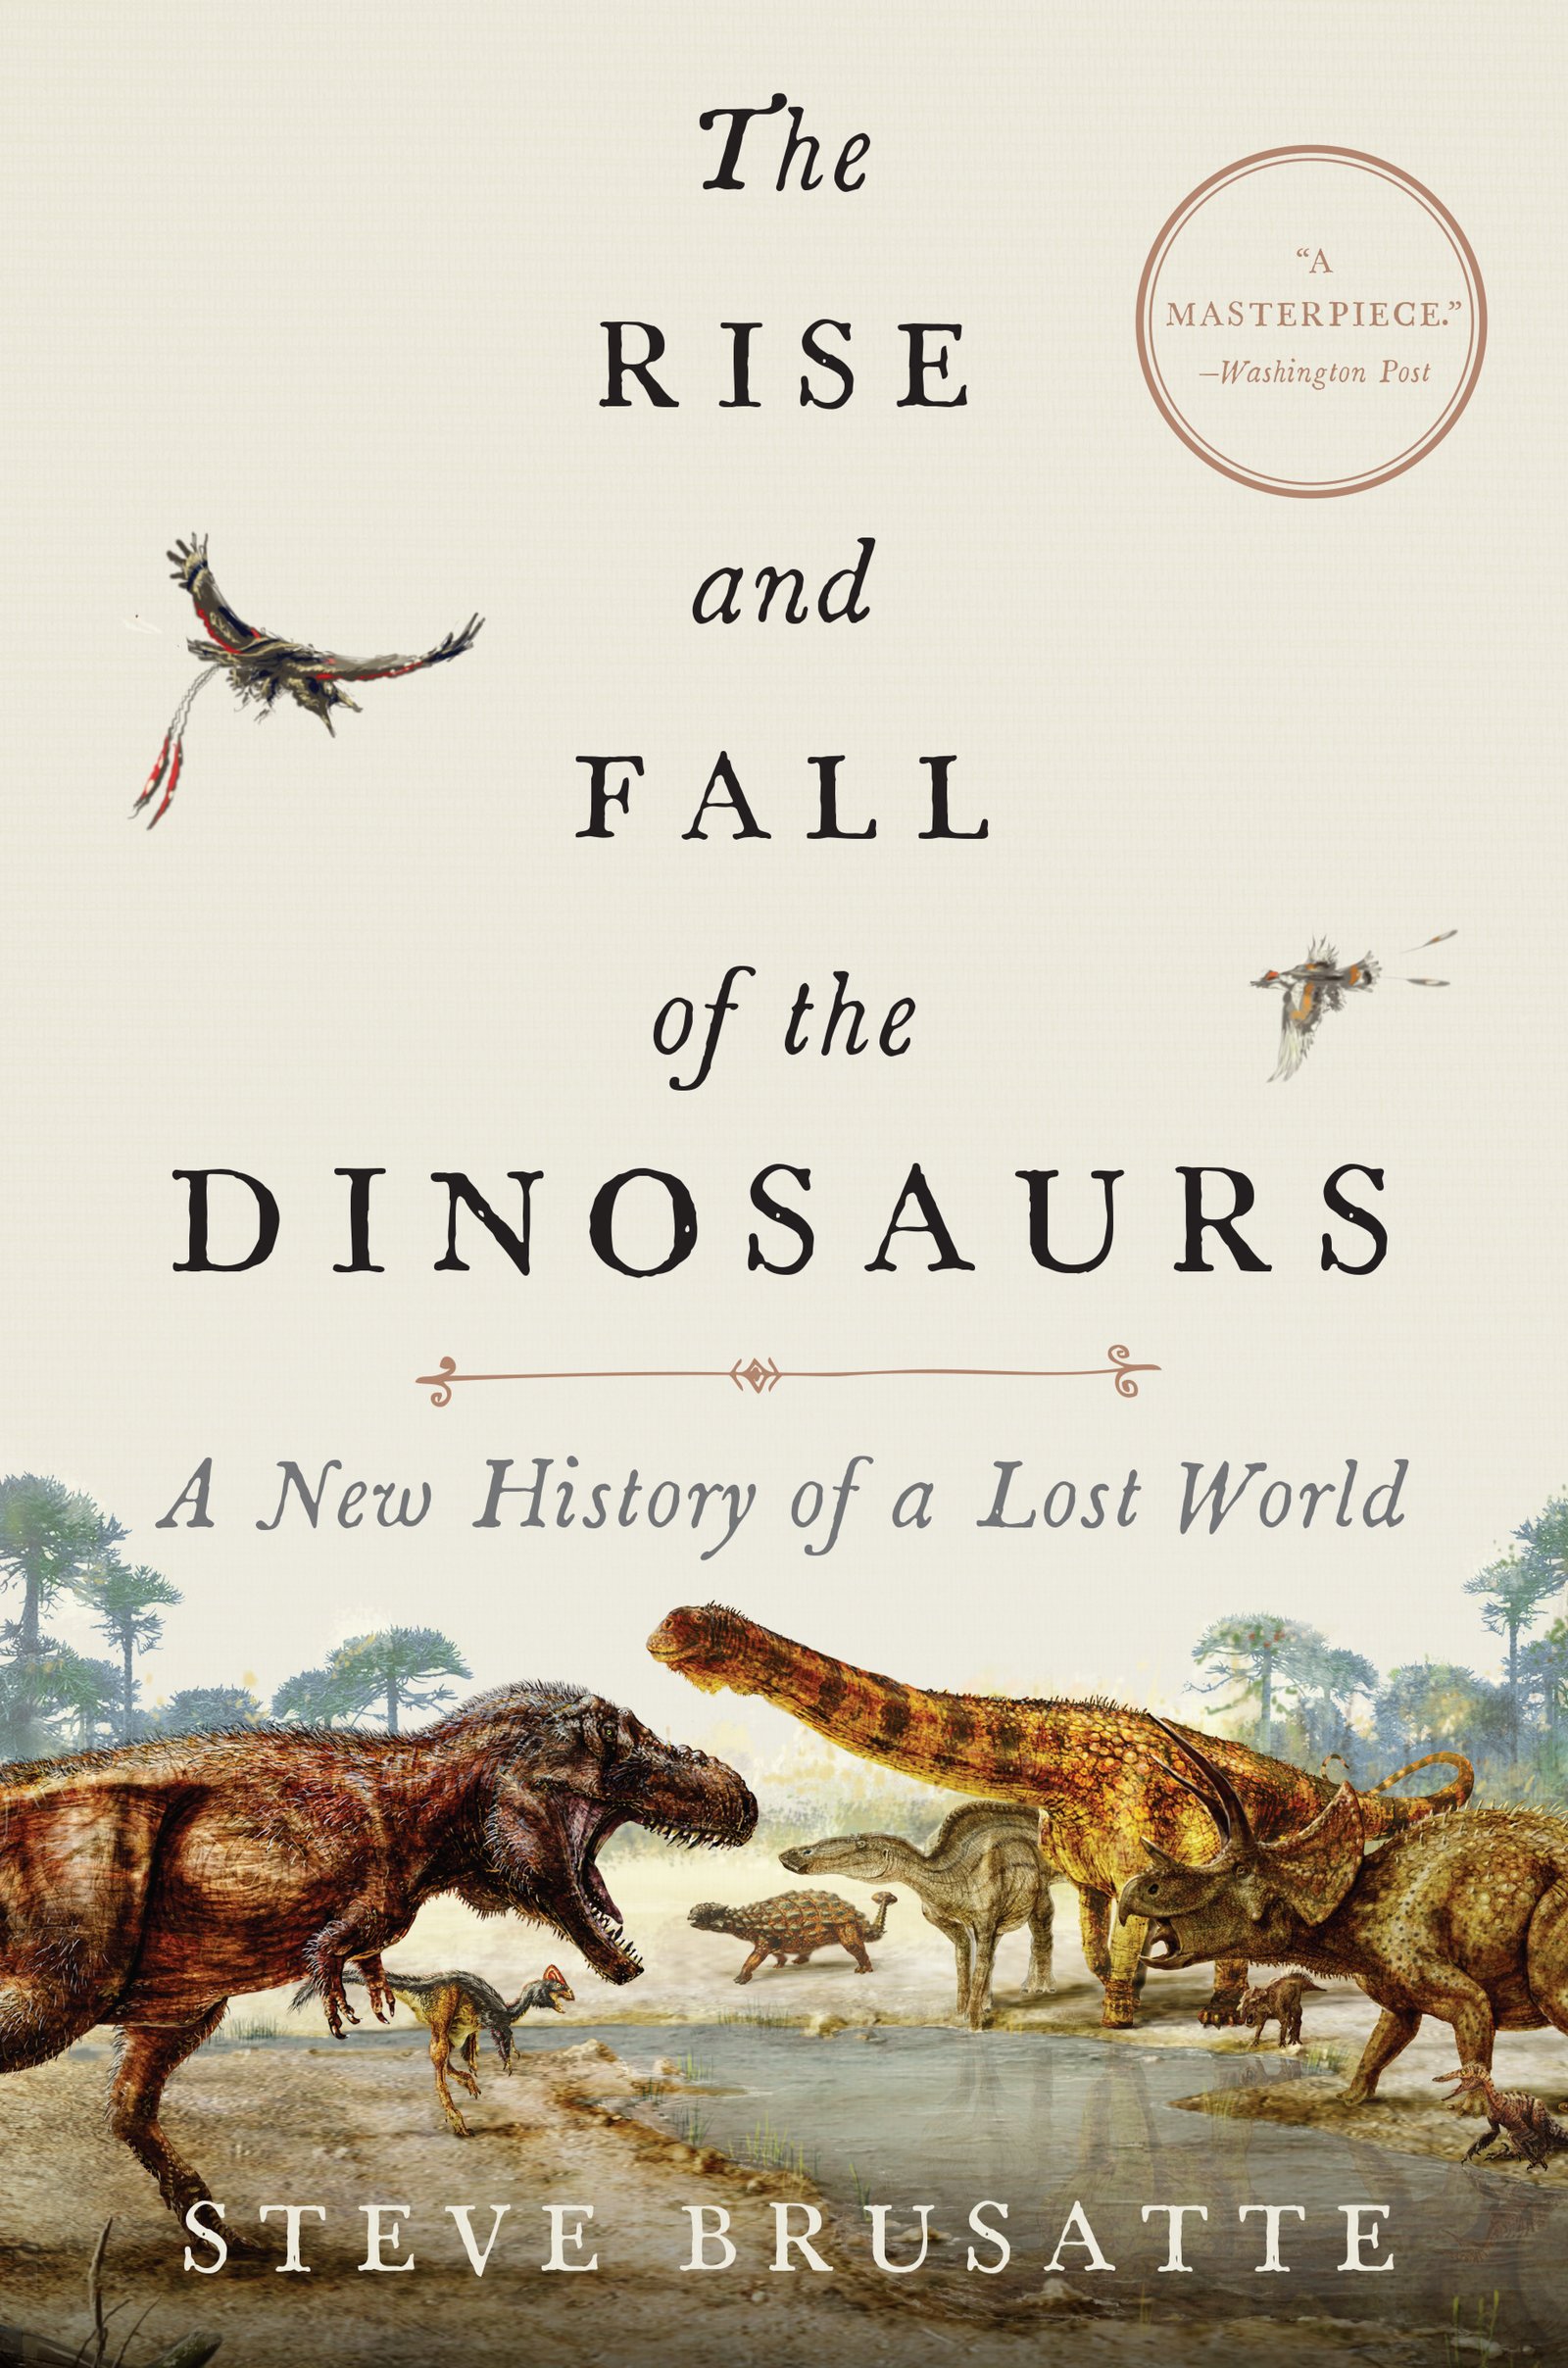 See The Rise and Fall of the Dinosaurs in Library Catalog